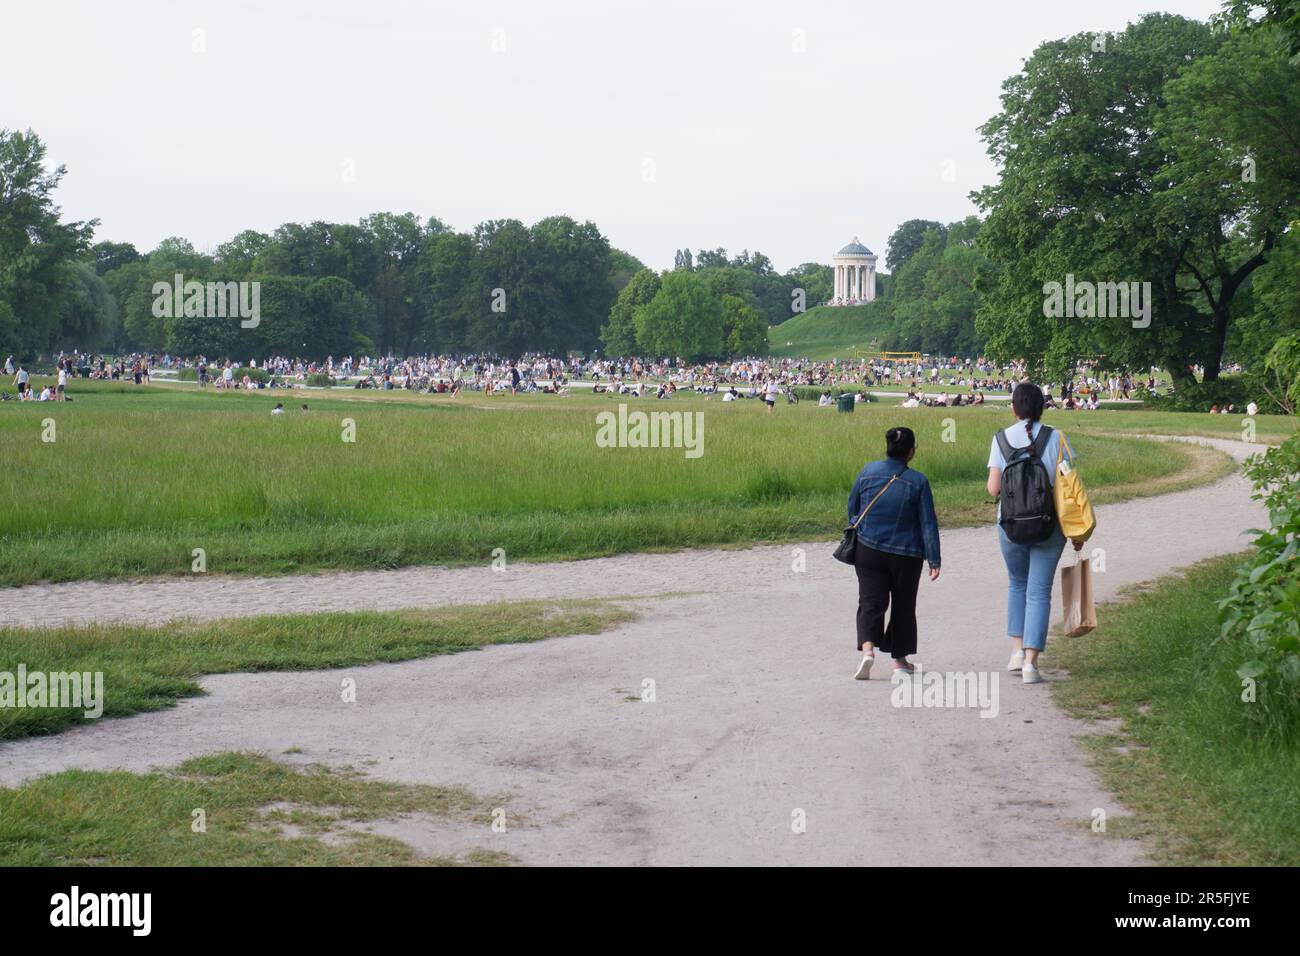 A pair of friends in foreground walk on a path in the Englischer Garten Munich Germany on a June evening, there are large crowds in the park beyond Stock Photo